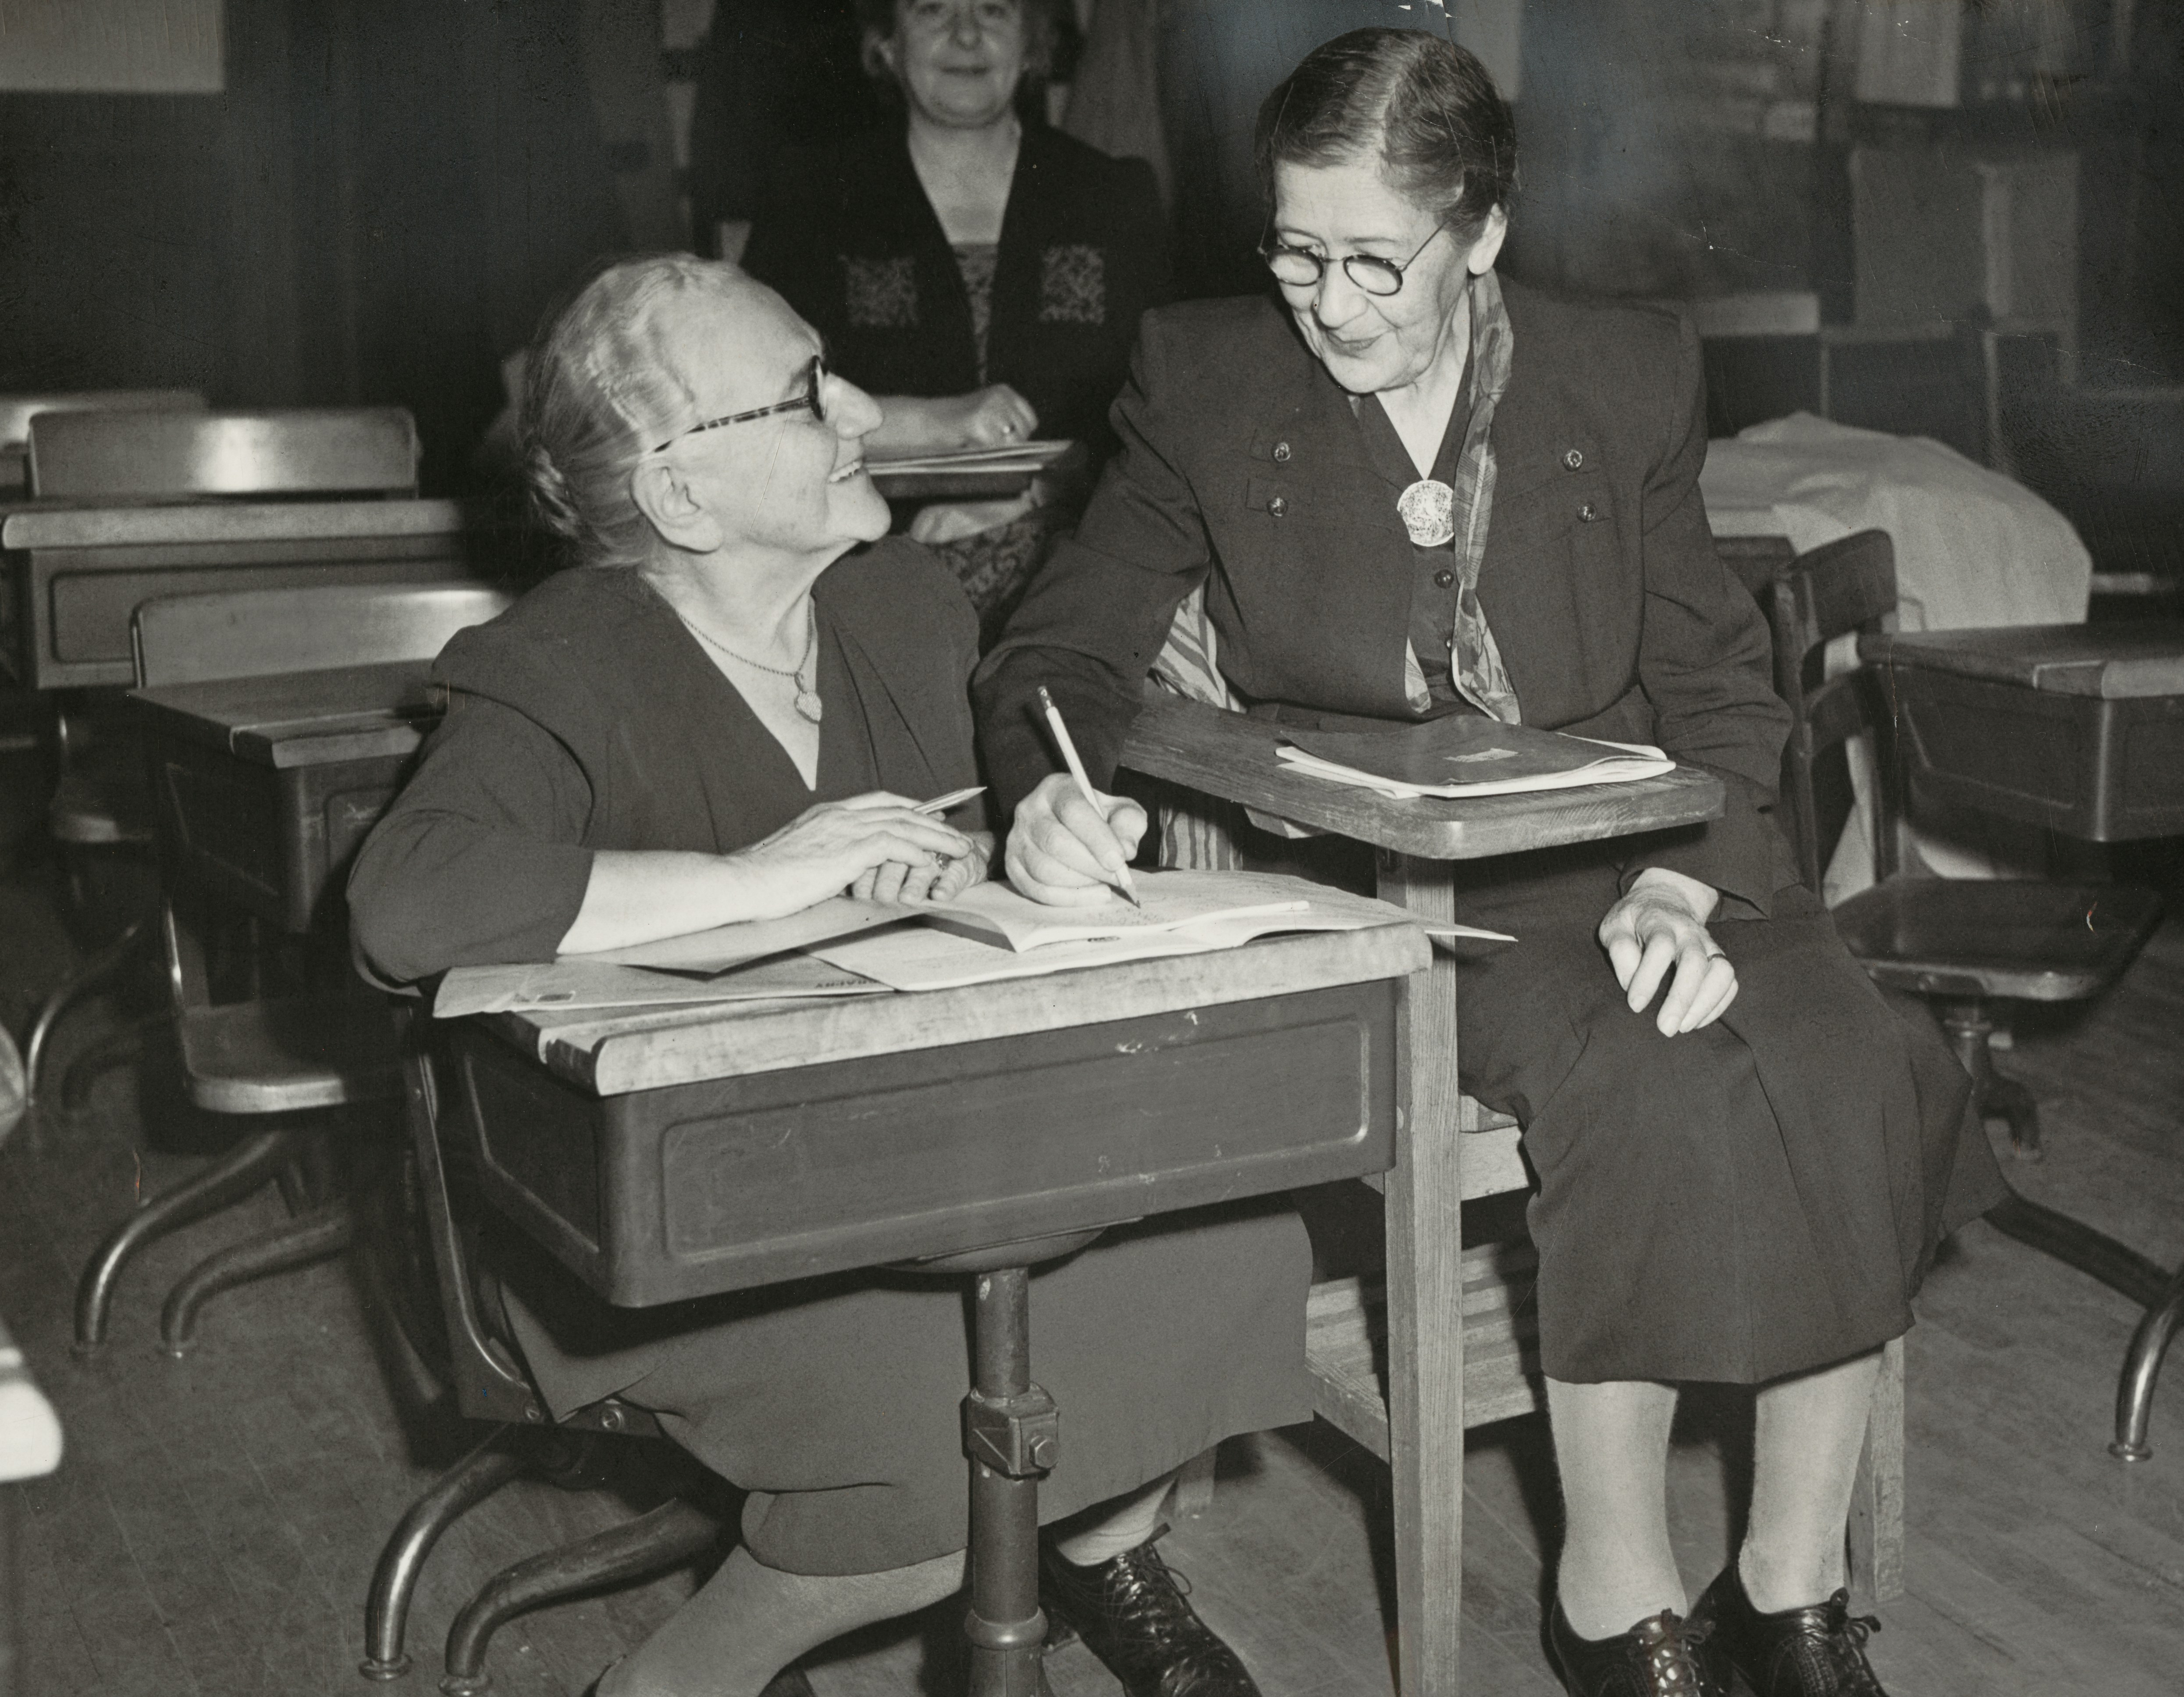 Age is no bar to studying when the pupils are working for their American citizenship. Mrs. Hedwig Gara, 76, at left, and Mrs. Rachel Alban, 84, help each other out in the school for DP's conducted by the Boston Section, National Council of Jewish Women, at Temple Kehillath Israel, Brookline. [from newspaper caption on recto] Published in the Boston Traveler on November 4, 1949. https://ark.digitalcommonwealth.org/ark:/50959/q524n565z Please visit Digital Commonwealth to view more images: https://www.digitalcommonwealth.org.